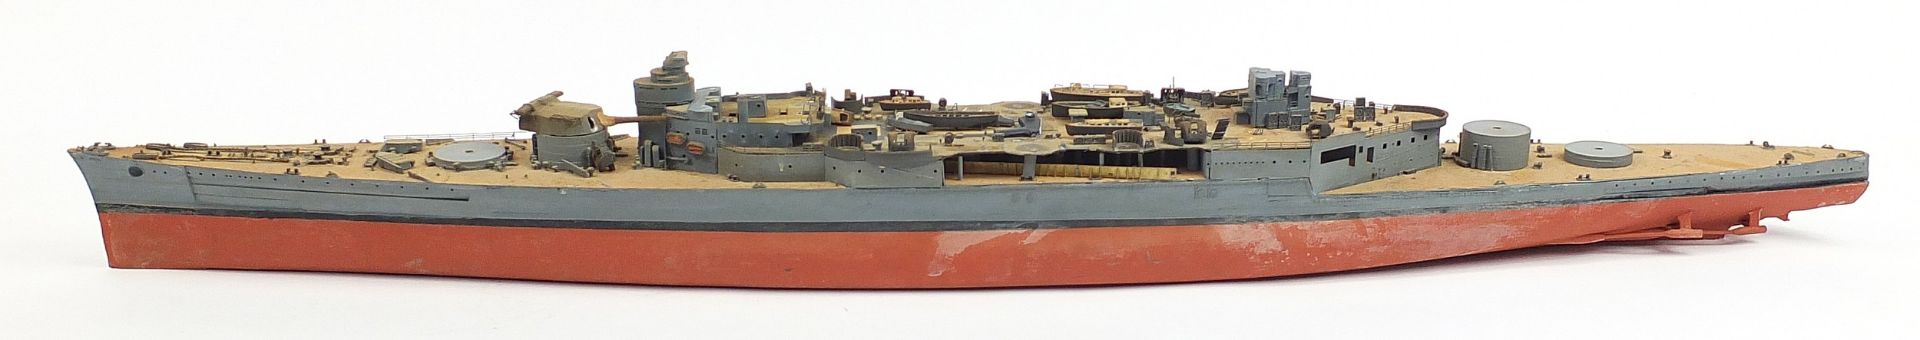 Large military interest model boat, 140cm in length - Image 2 of 5